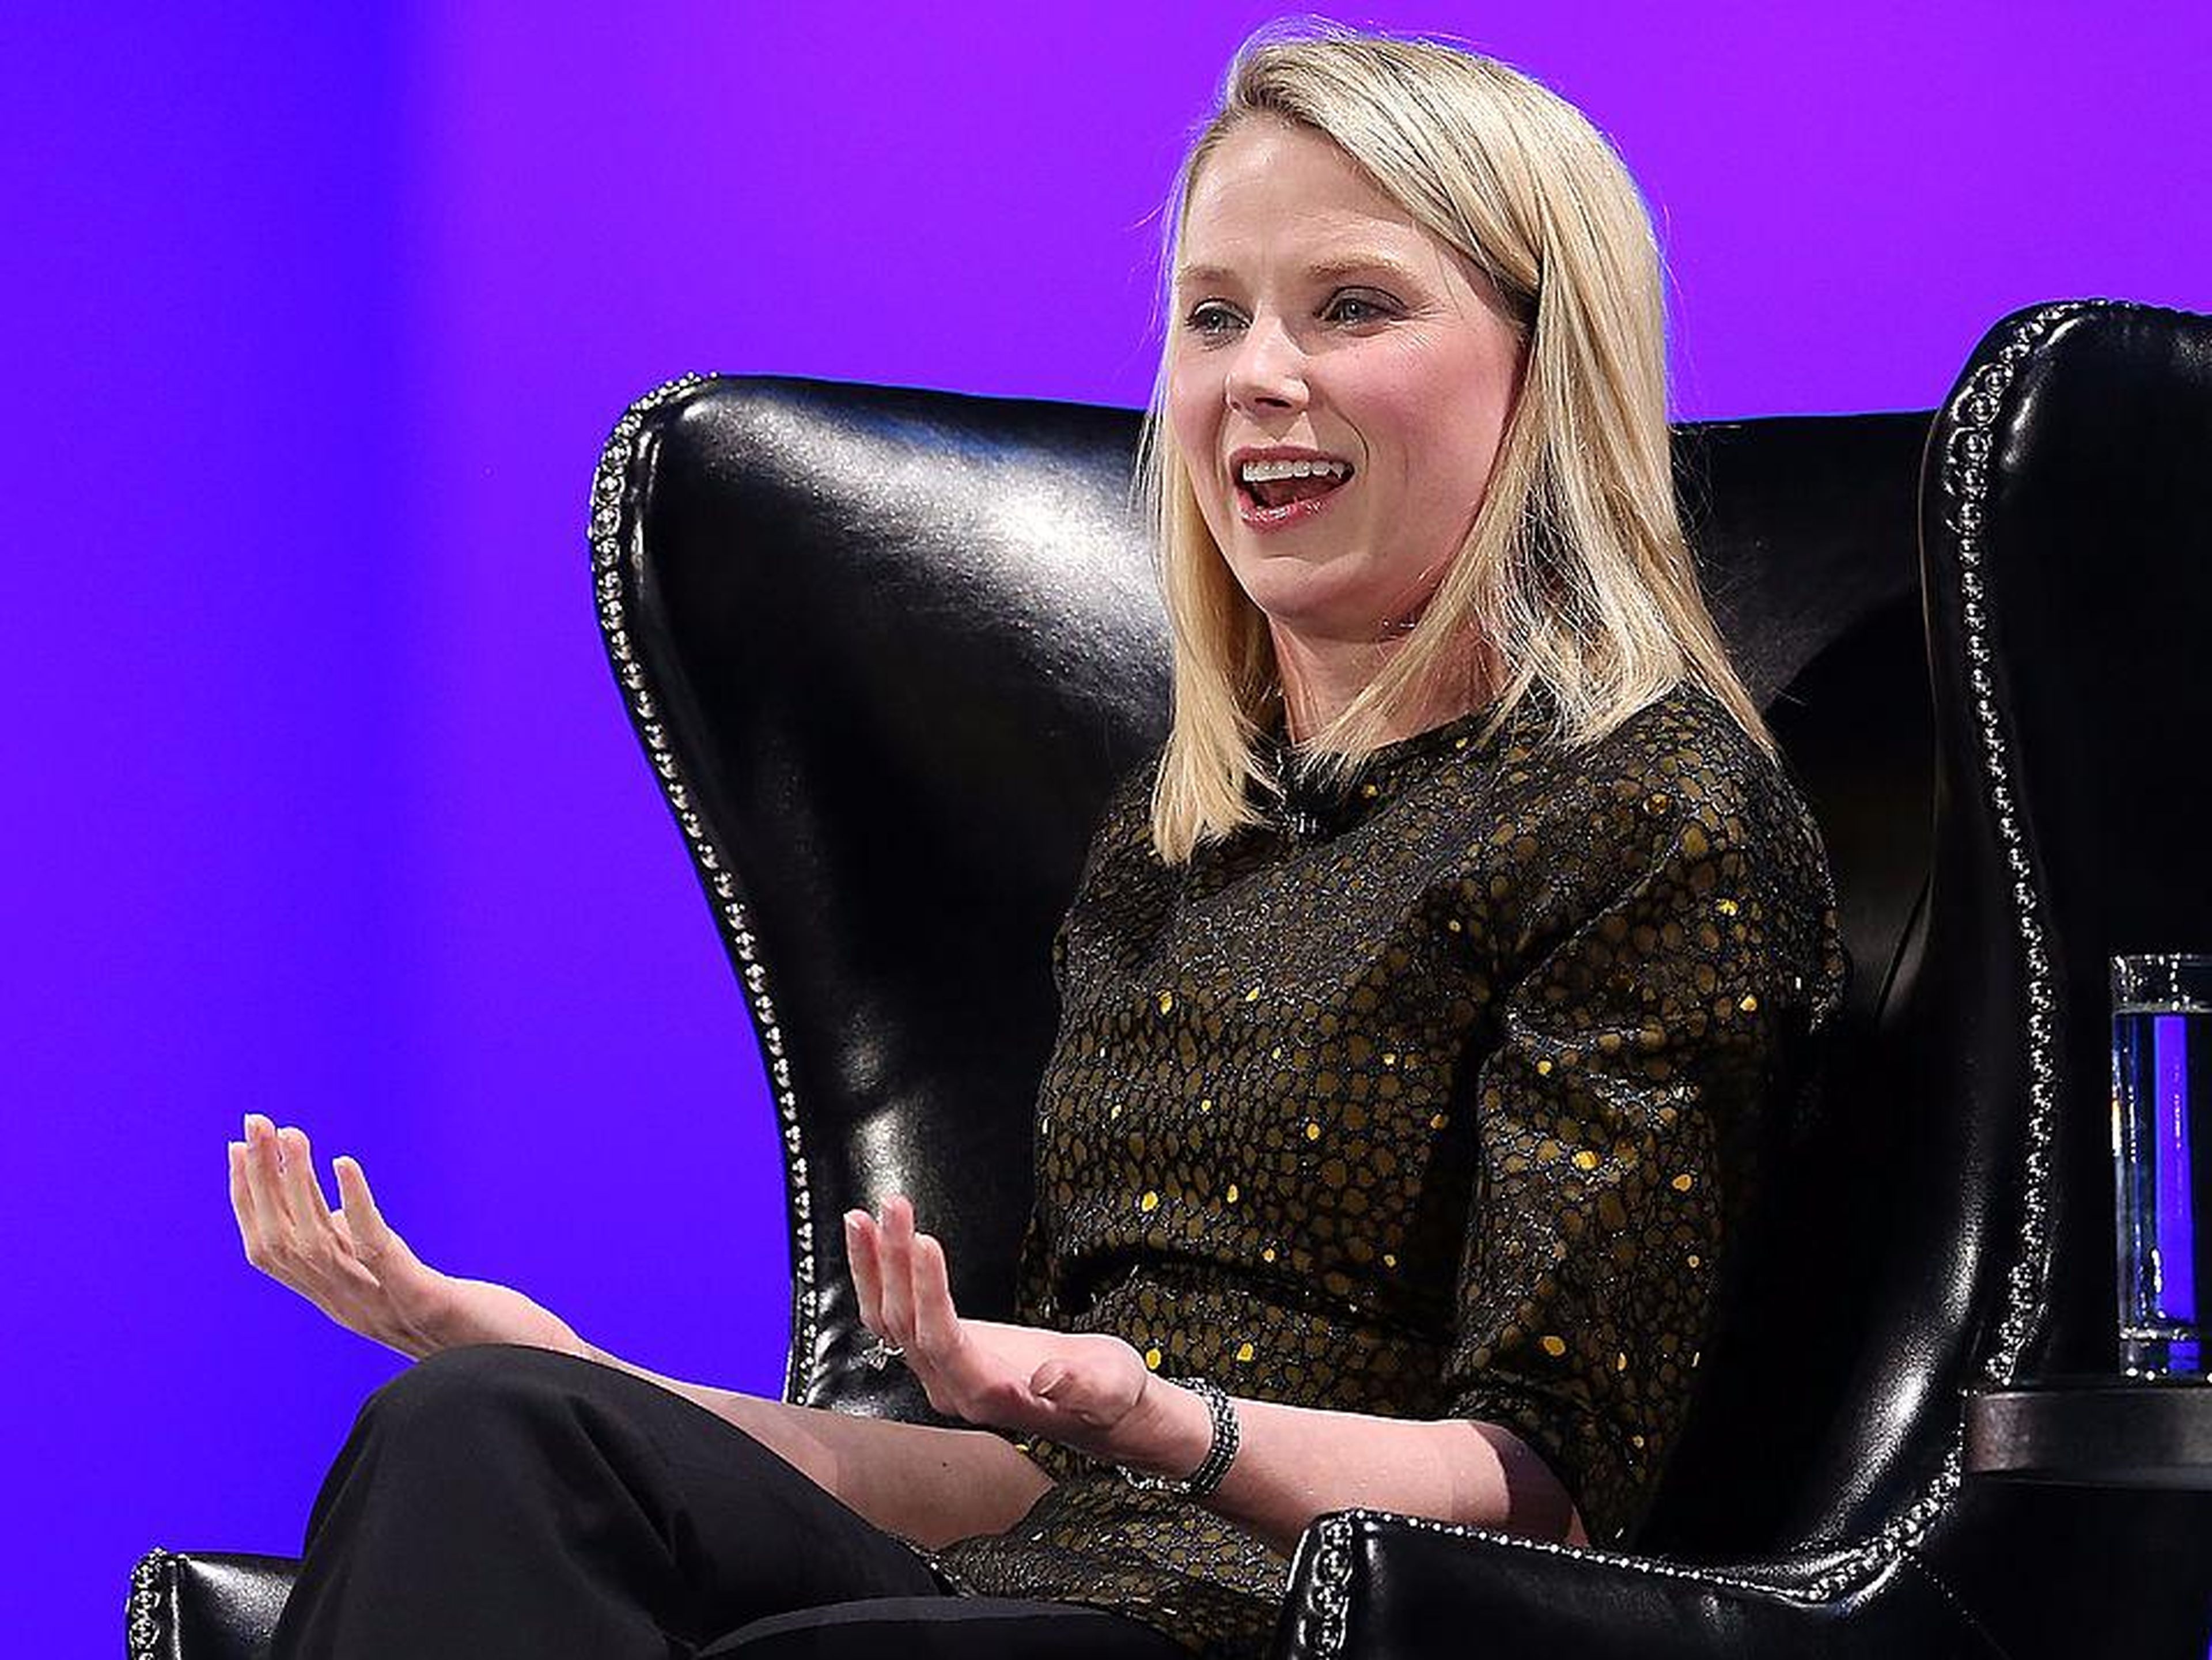 And former Yahoo CEO Marissa Meyer used to put in 130-hour weeks while working at Google, which she managed by sleeping under her desk.